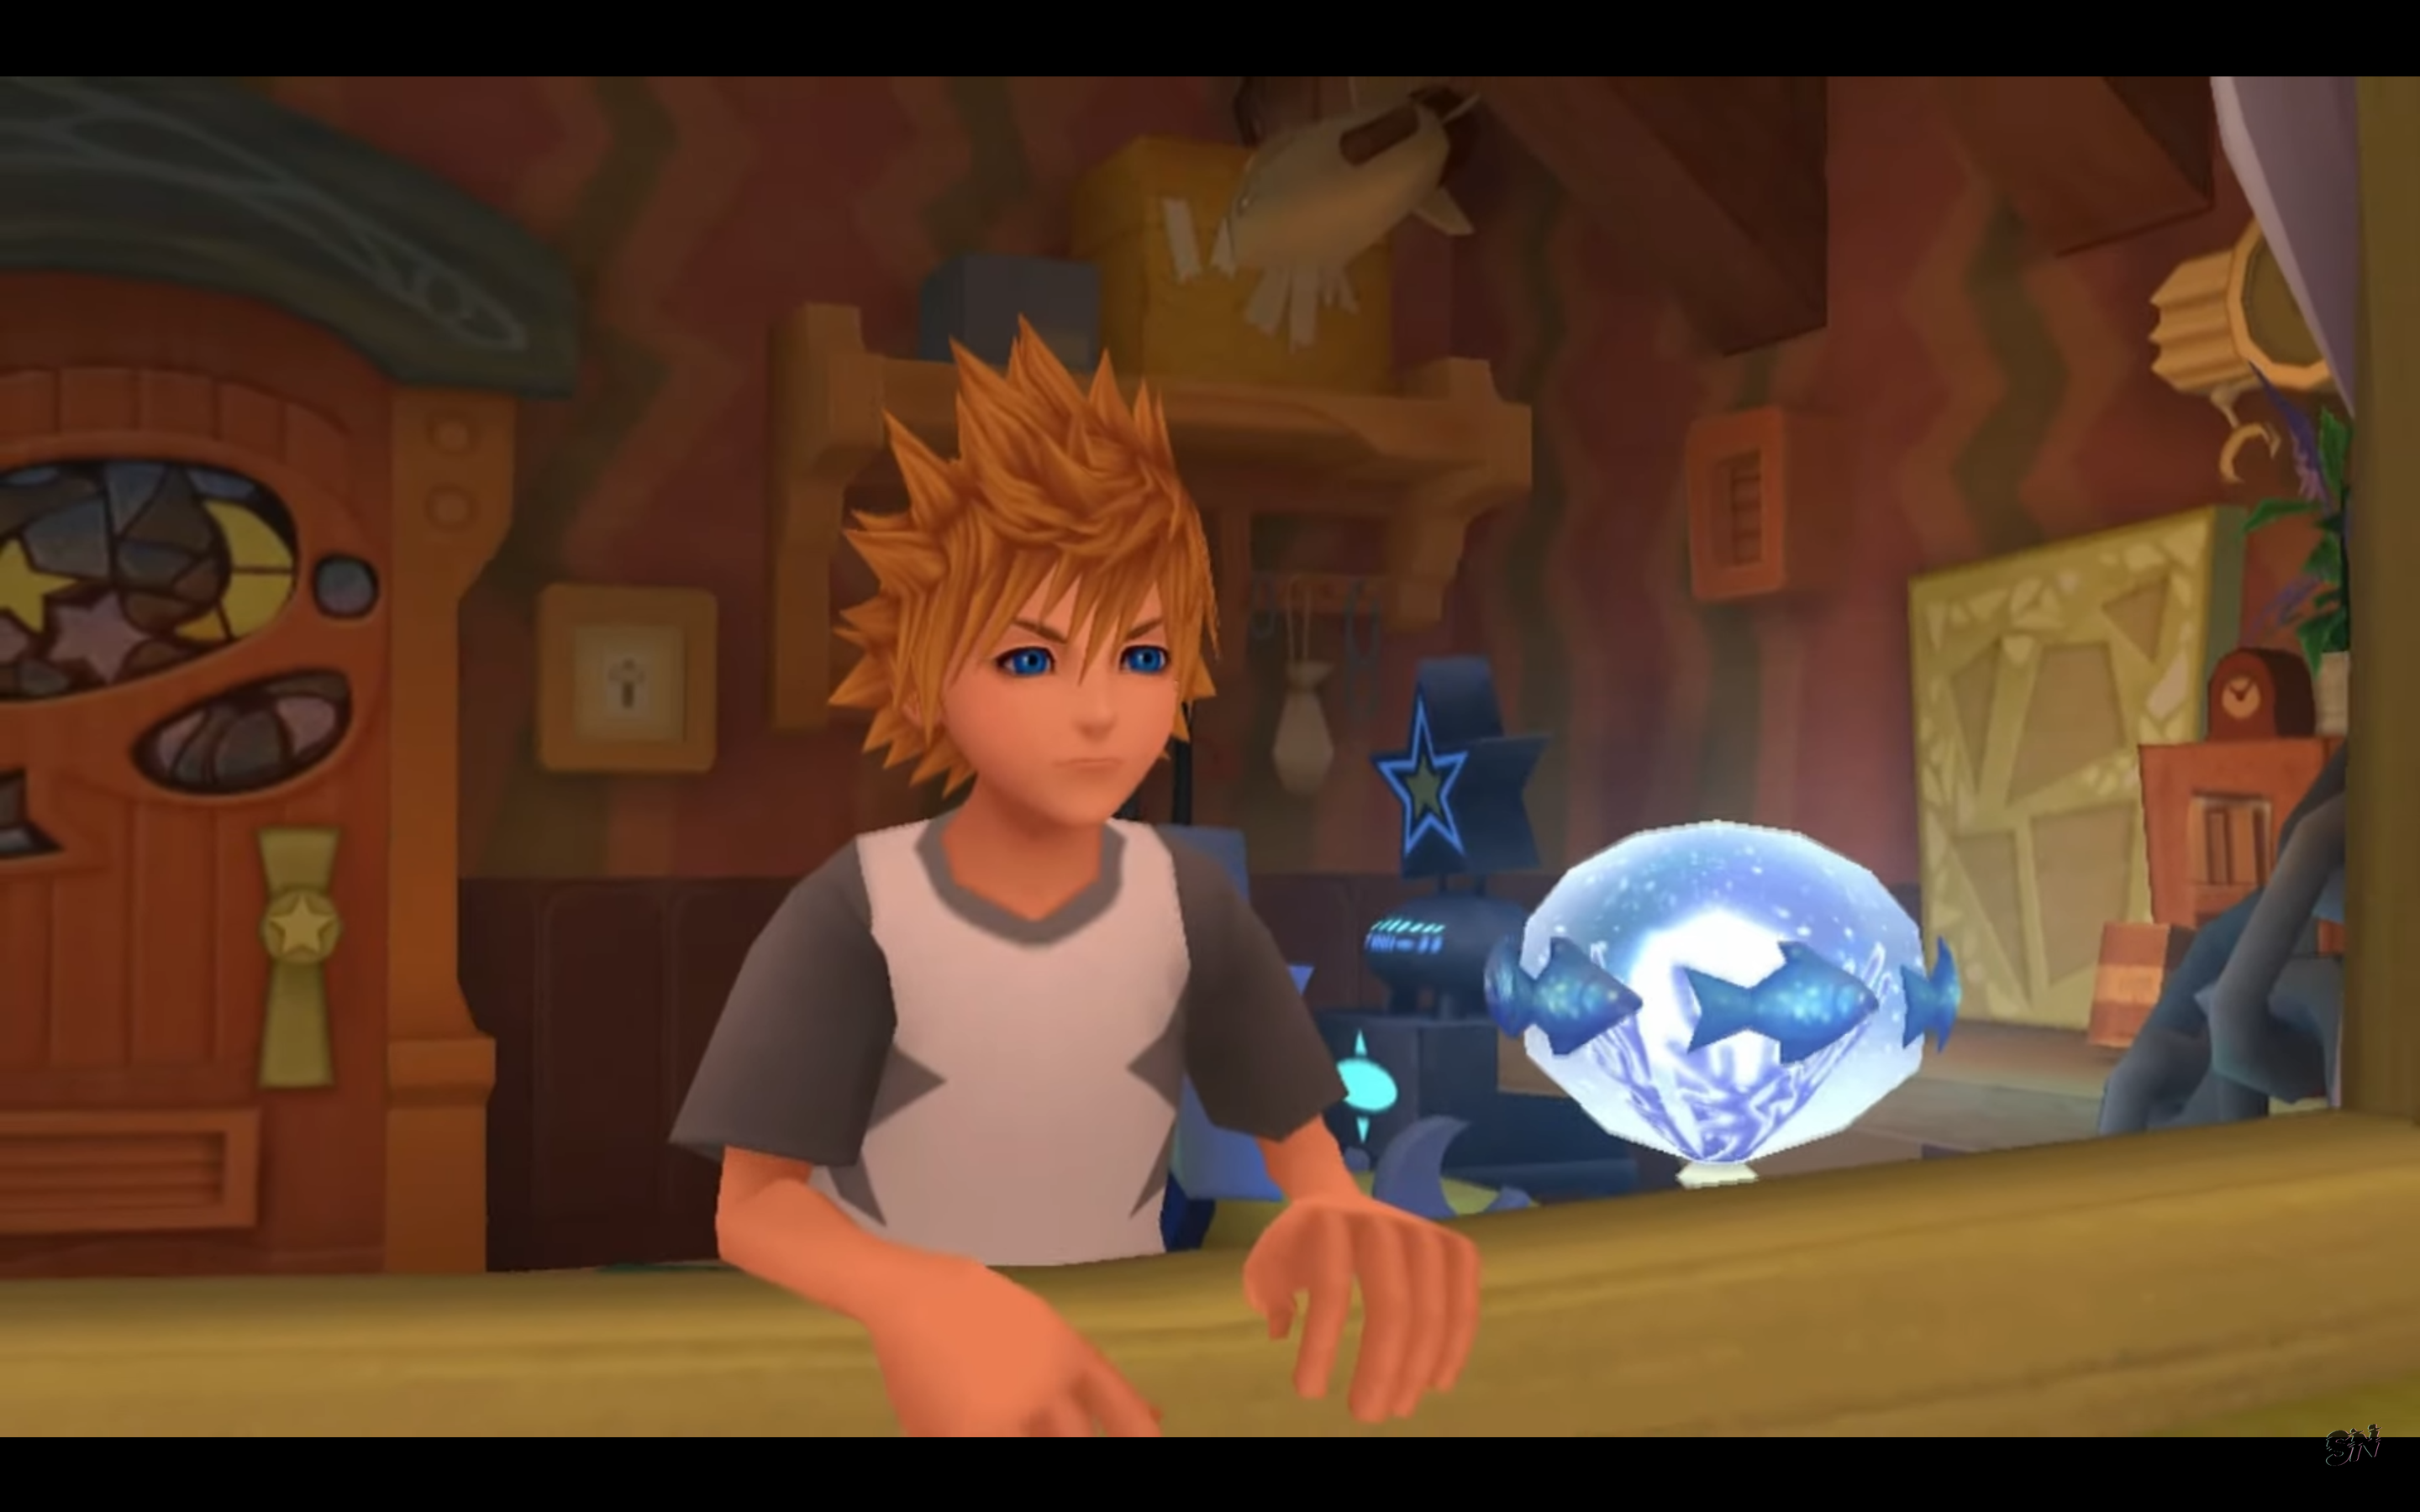 "Kingdom Hearts: 358/2 Days". 2009. Square Enix.
Roxas waking up in Twilight Town.